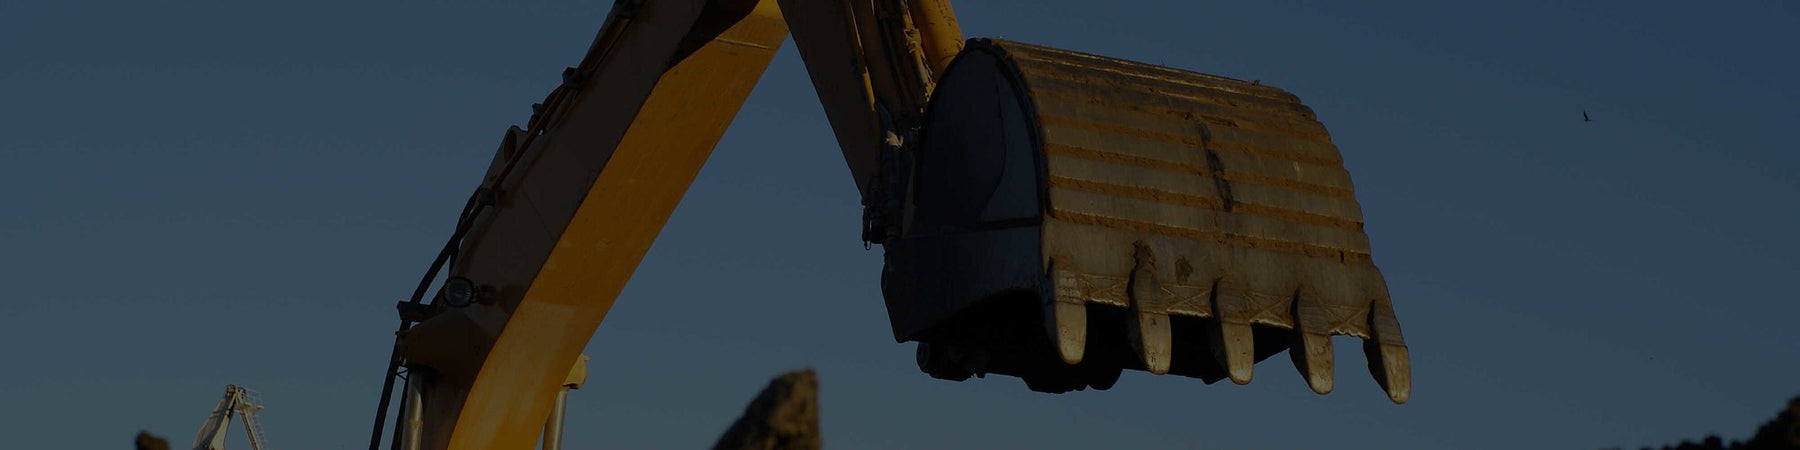 Key Components of an Excavator Arm and How to Maintain Them